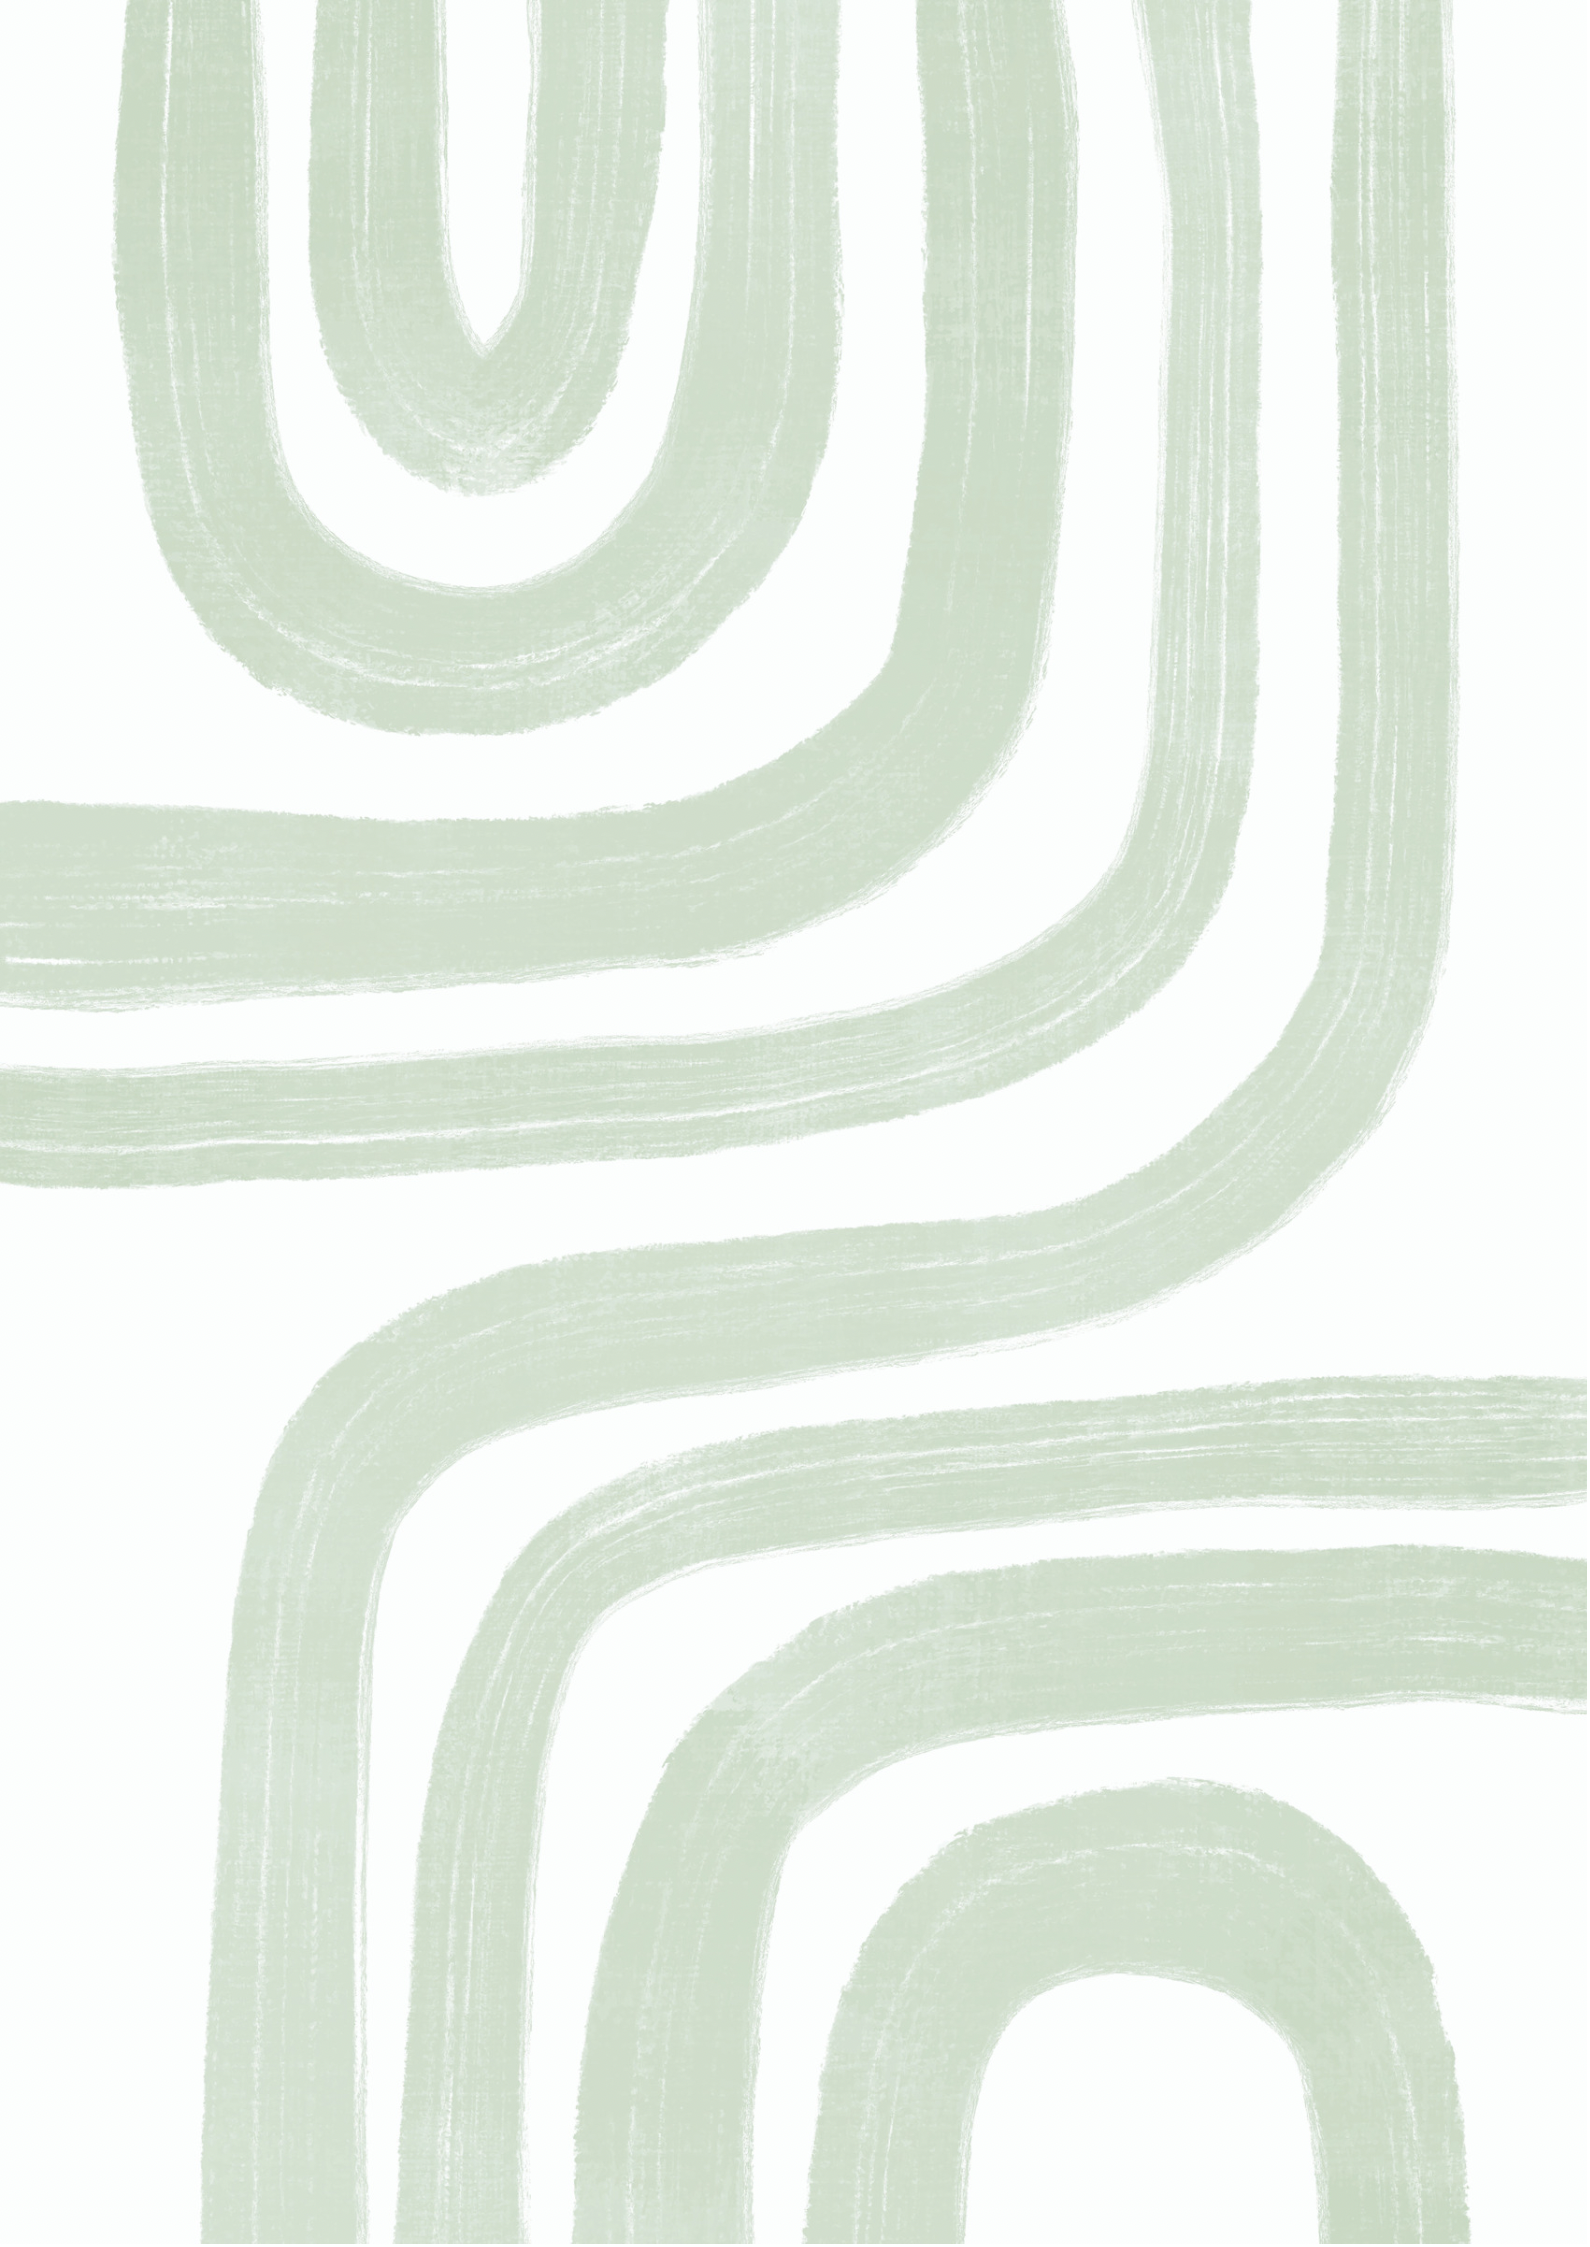 The Fine Line in Green print